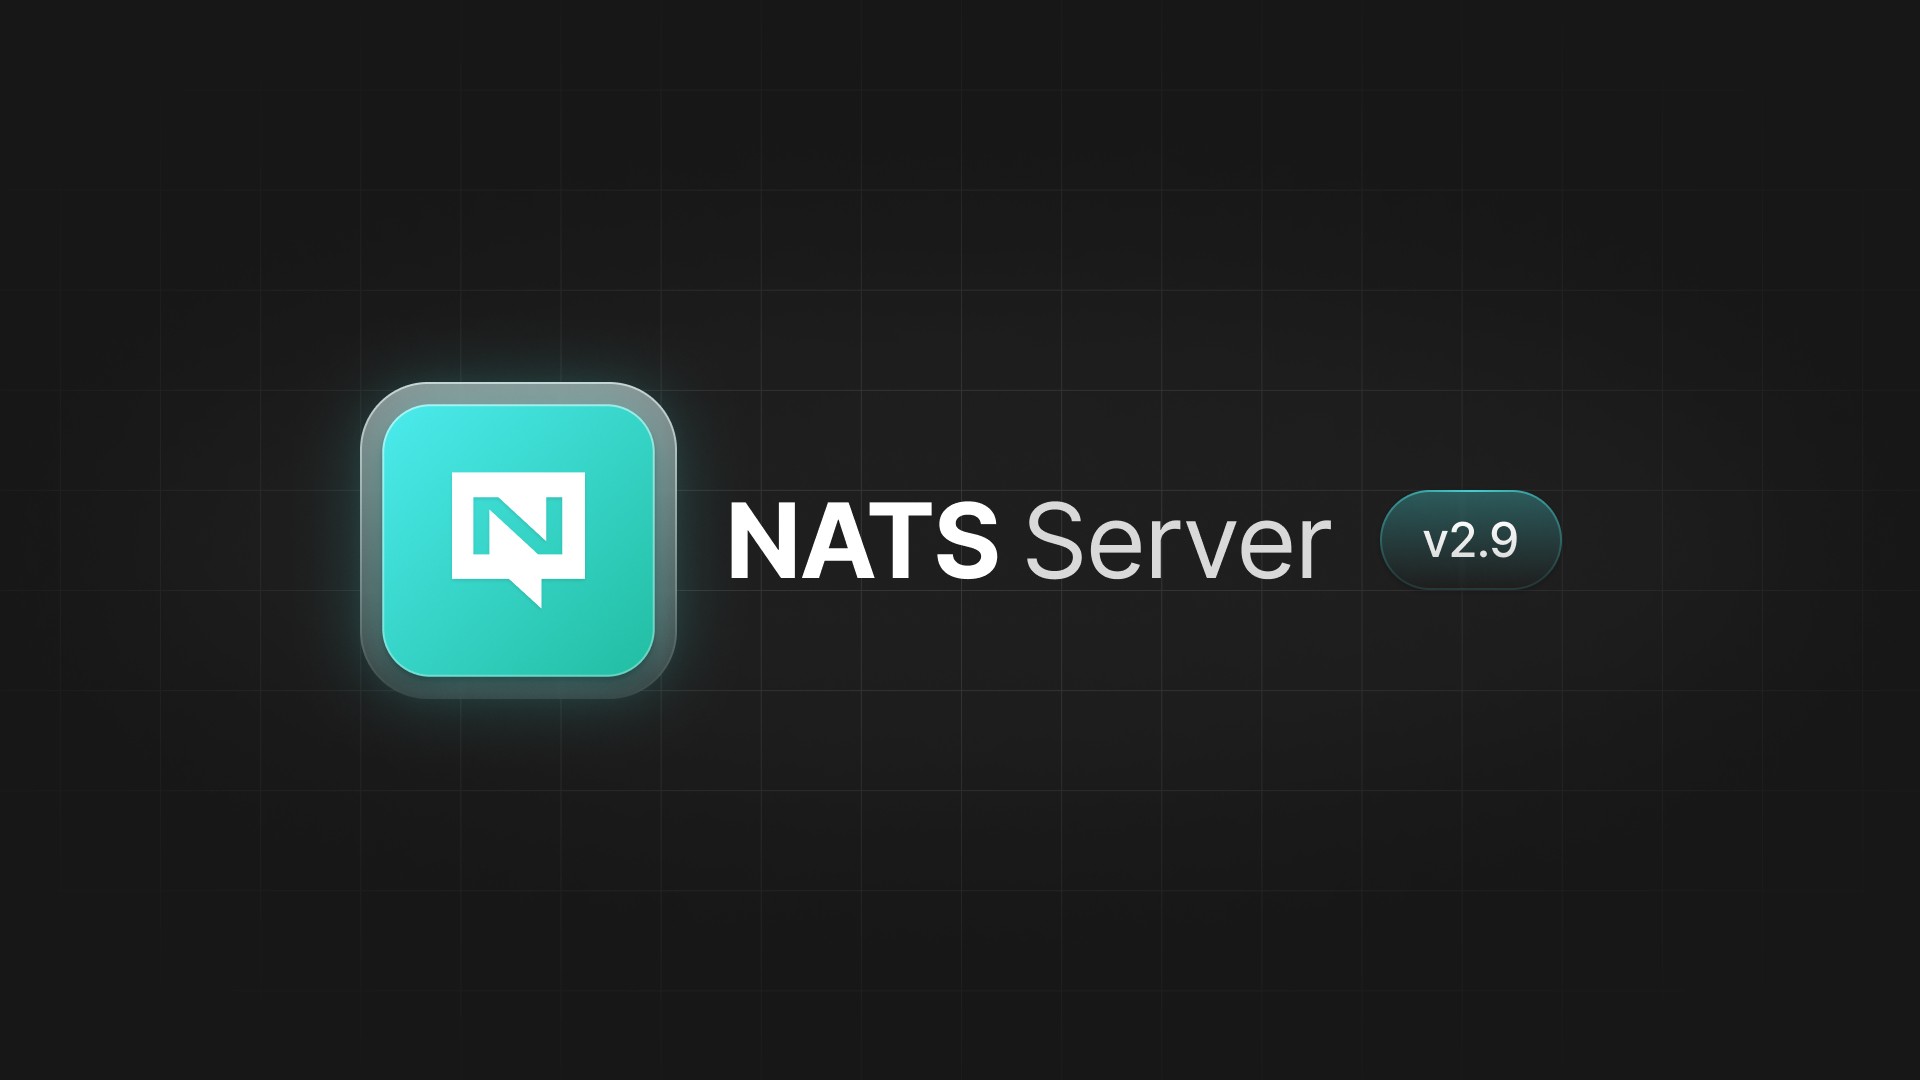 NATS server 2.9 release: more stability, greater scale, better security